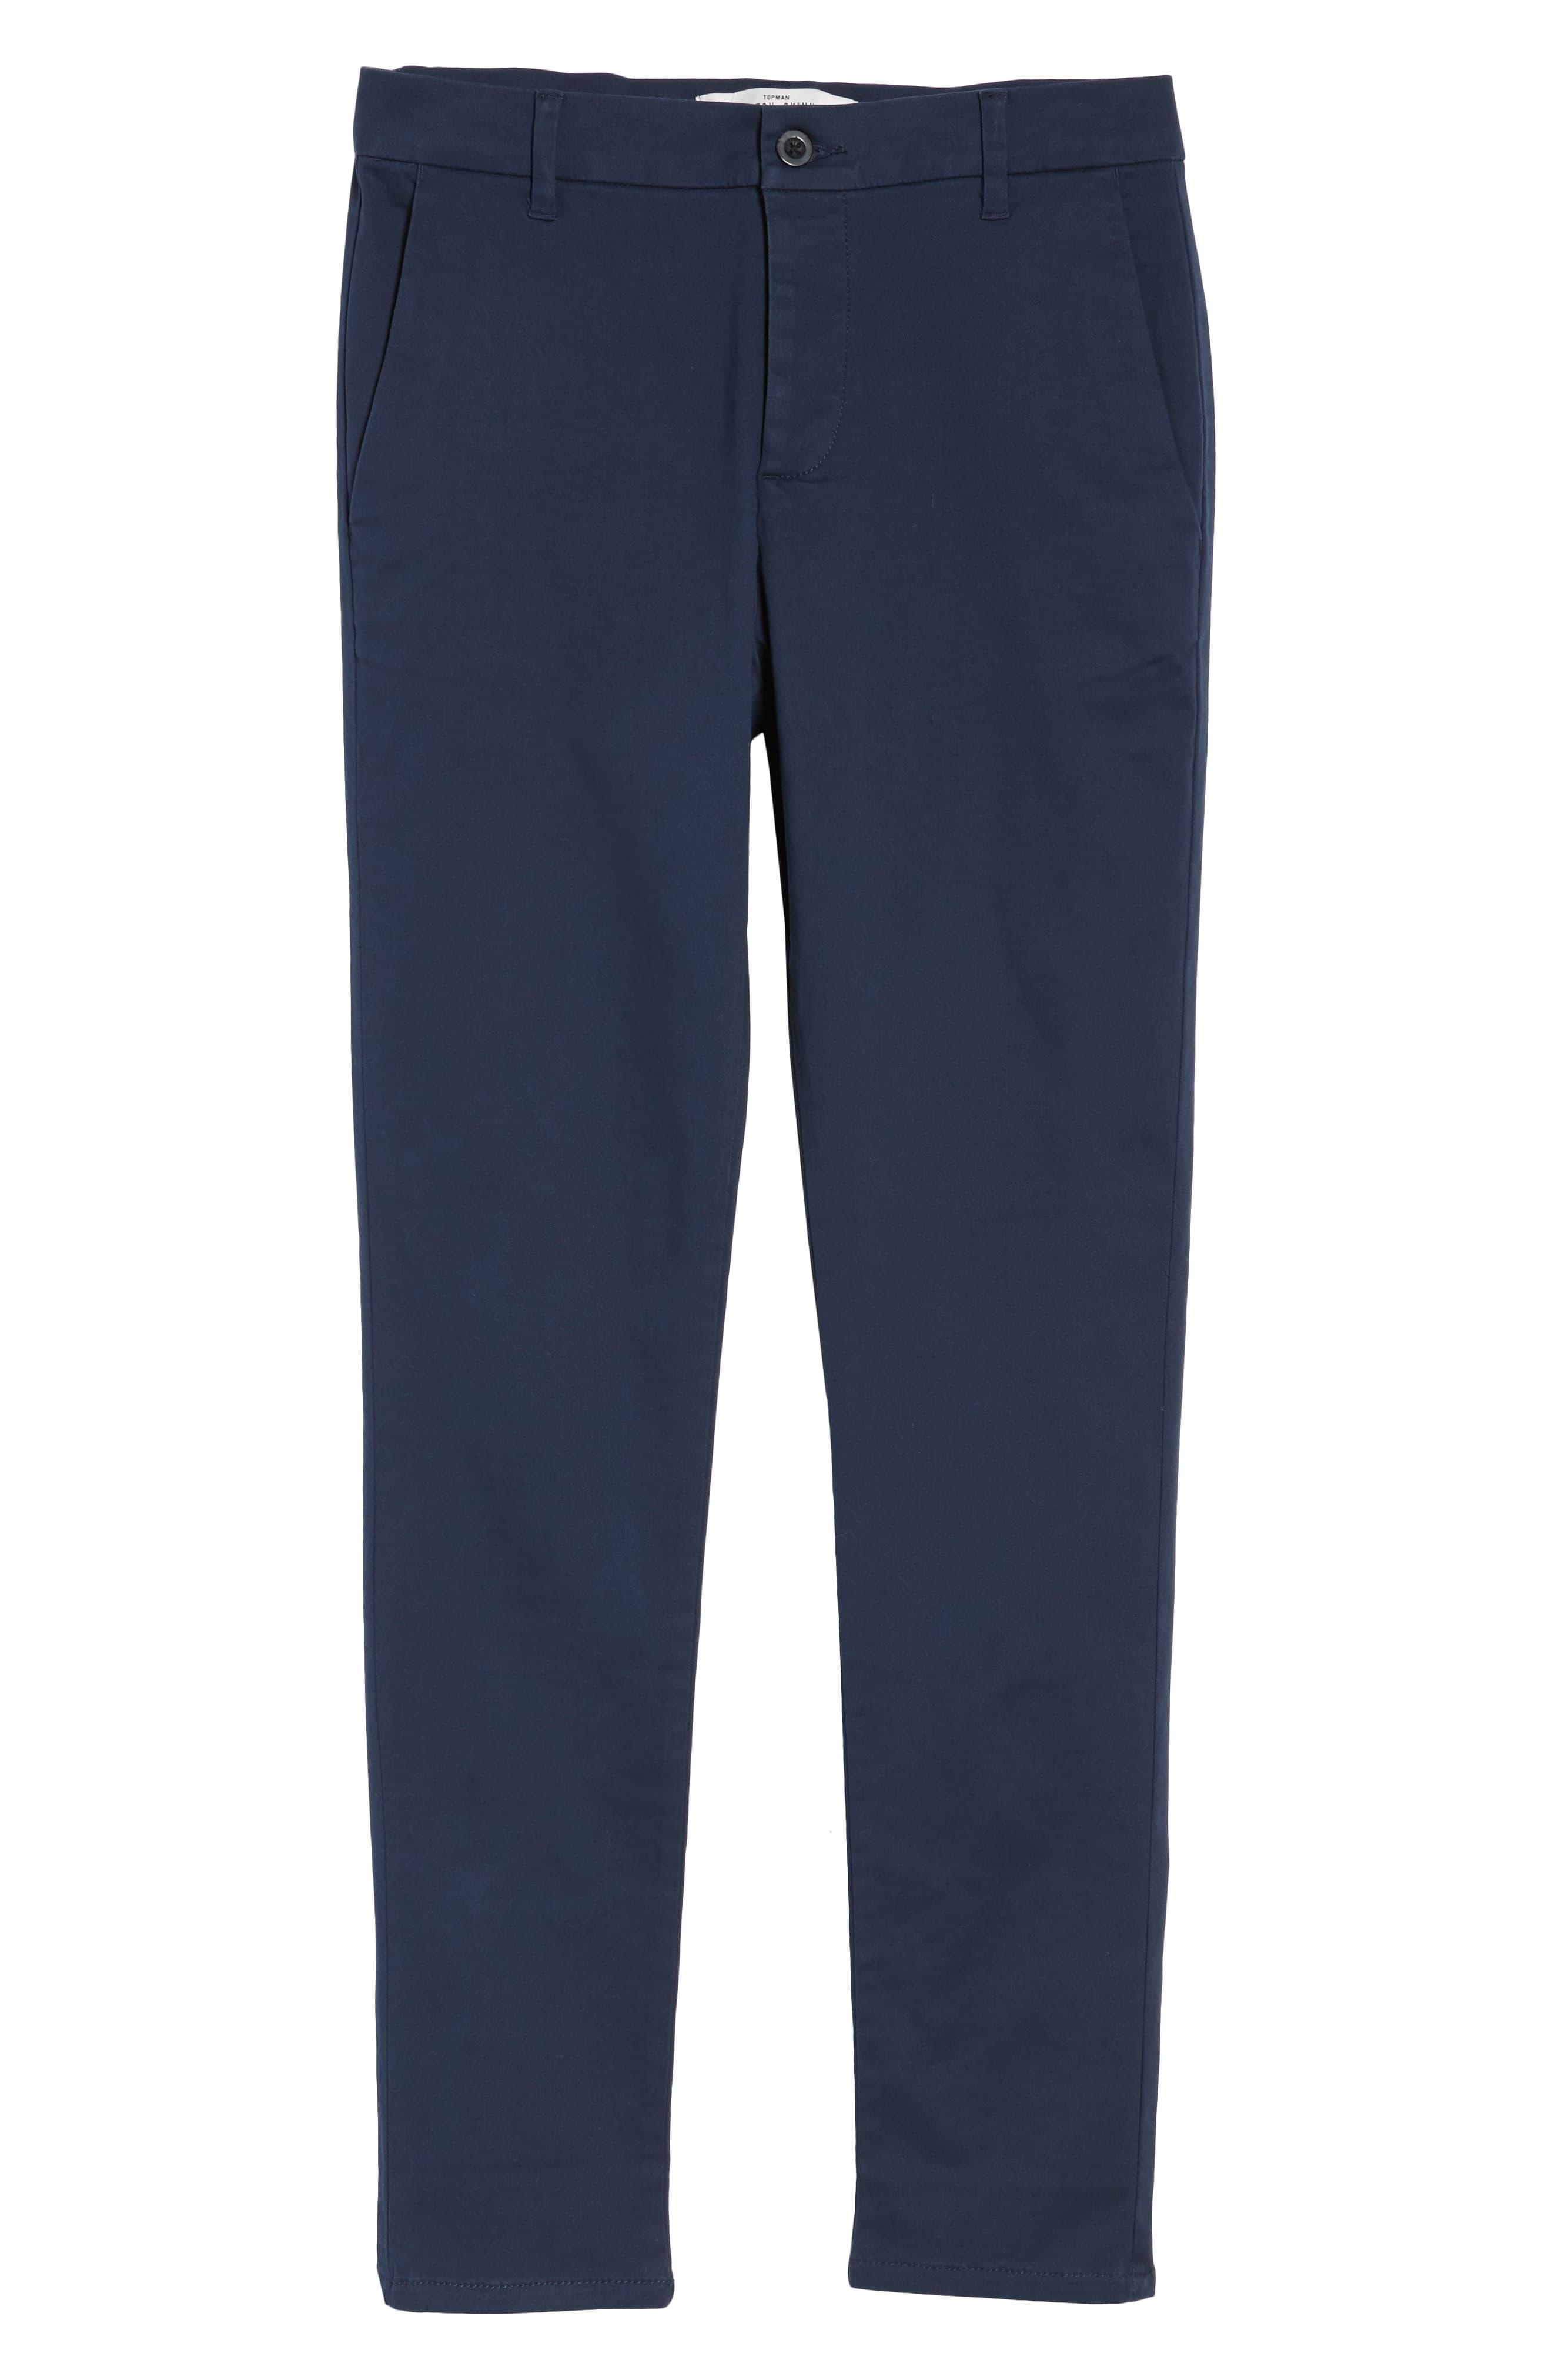 TOPMAN Cotton Stretch Skinny Fit Chinos in Dark Blue (Blue) for Men - Lyst